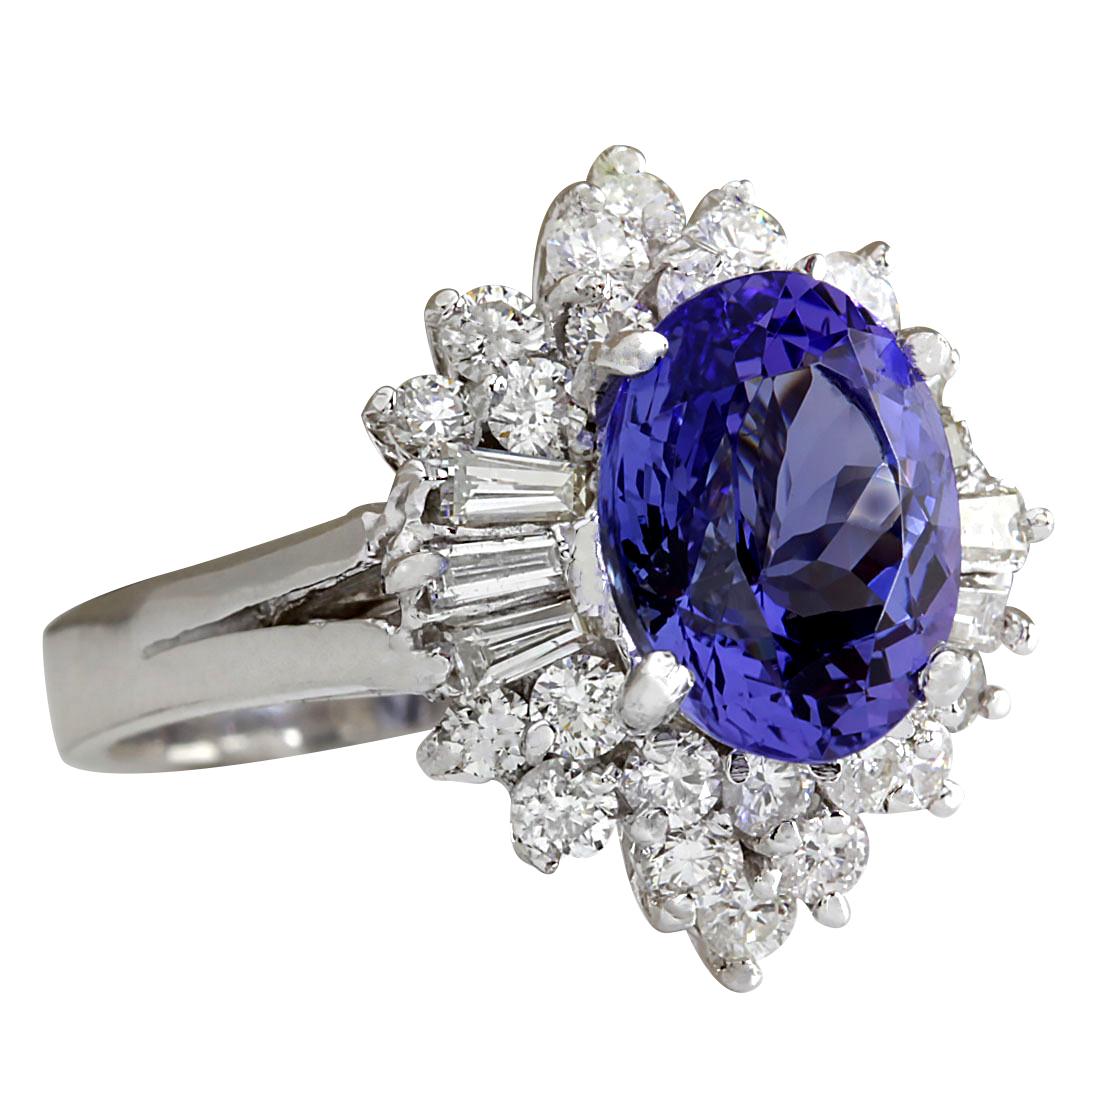 Stamped: 14K White Gold
Total Ring Weight: 7.4 Grams
Total Natural Tanzanite Weight is 3.76 Carat (Measures: 10.00x8.00 mm)
Color: Blue
Total Natural Diamond Weight is 1.55 Carat
Color: F-G, Clarity: VS2-SI1
Face Measures: 18.85x15.55 mm
Sku: